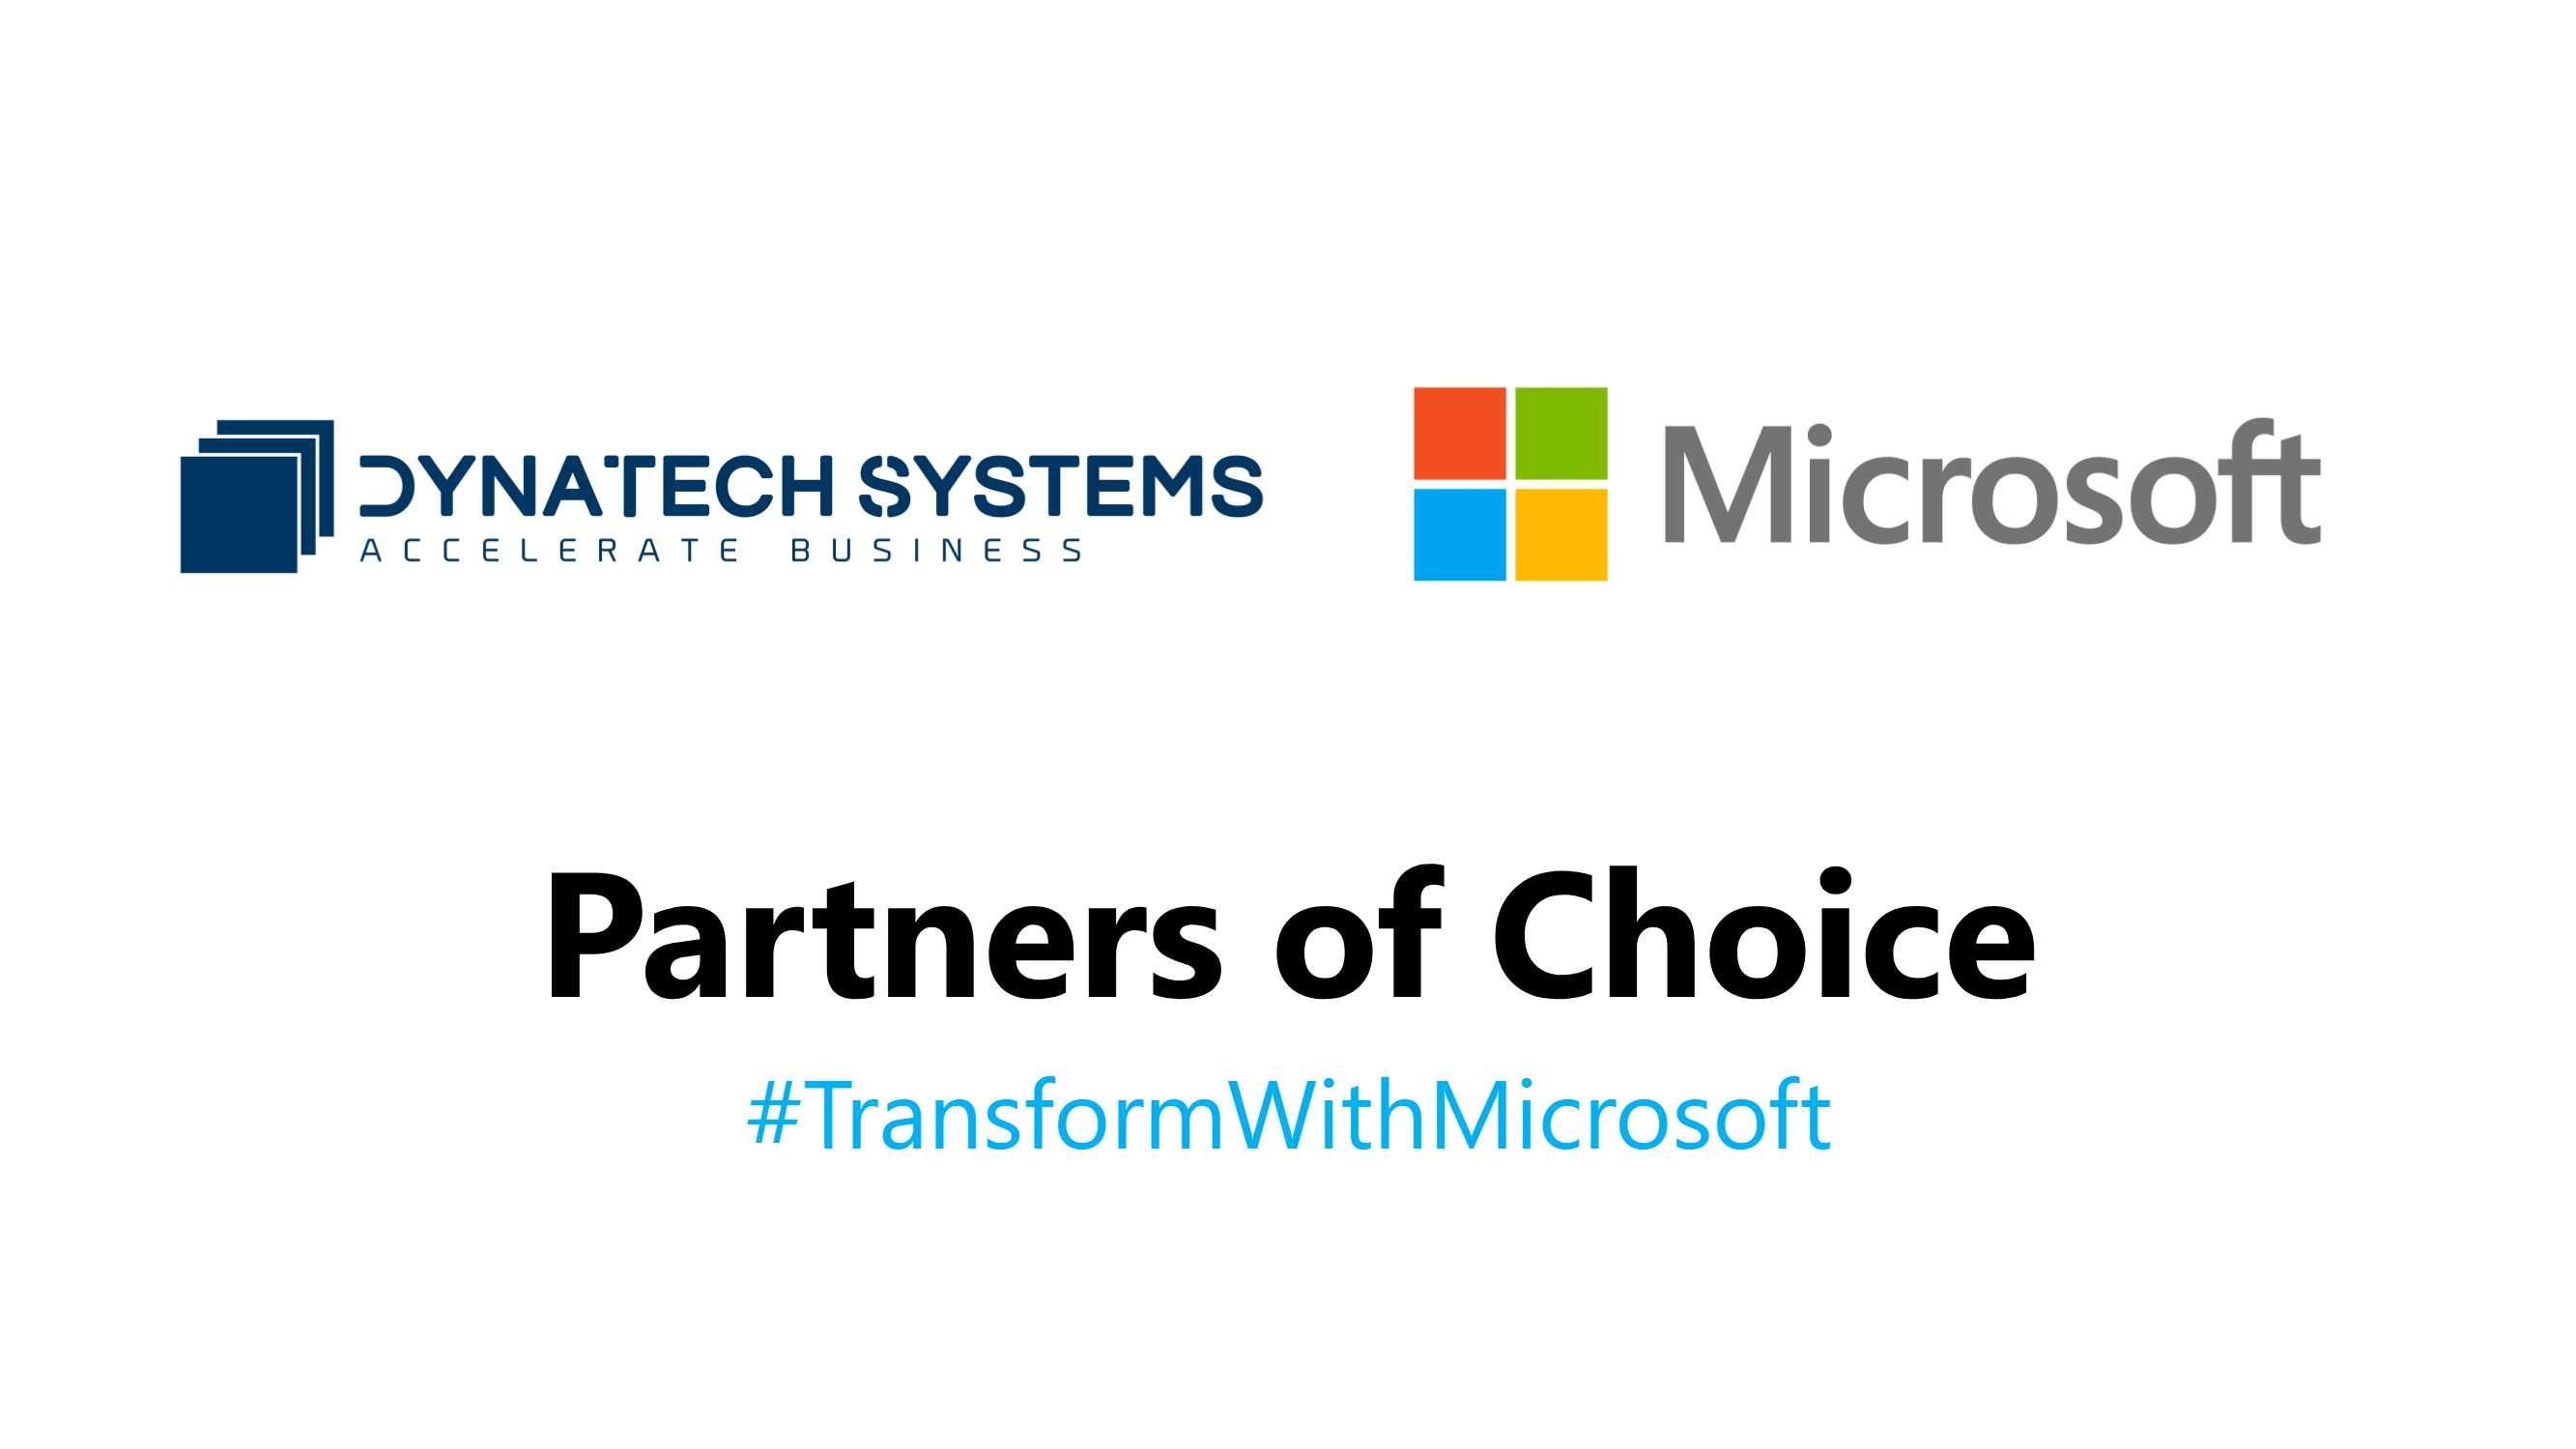 Not Just One of the Partners of Choice. But Microsoft Partnership that Leverages Cutting-Edge Innovation